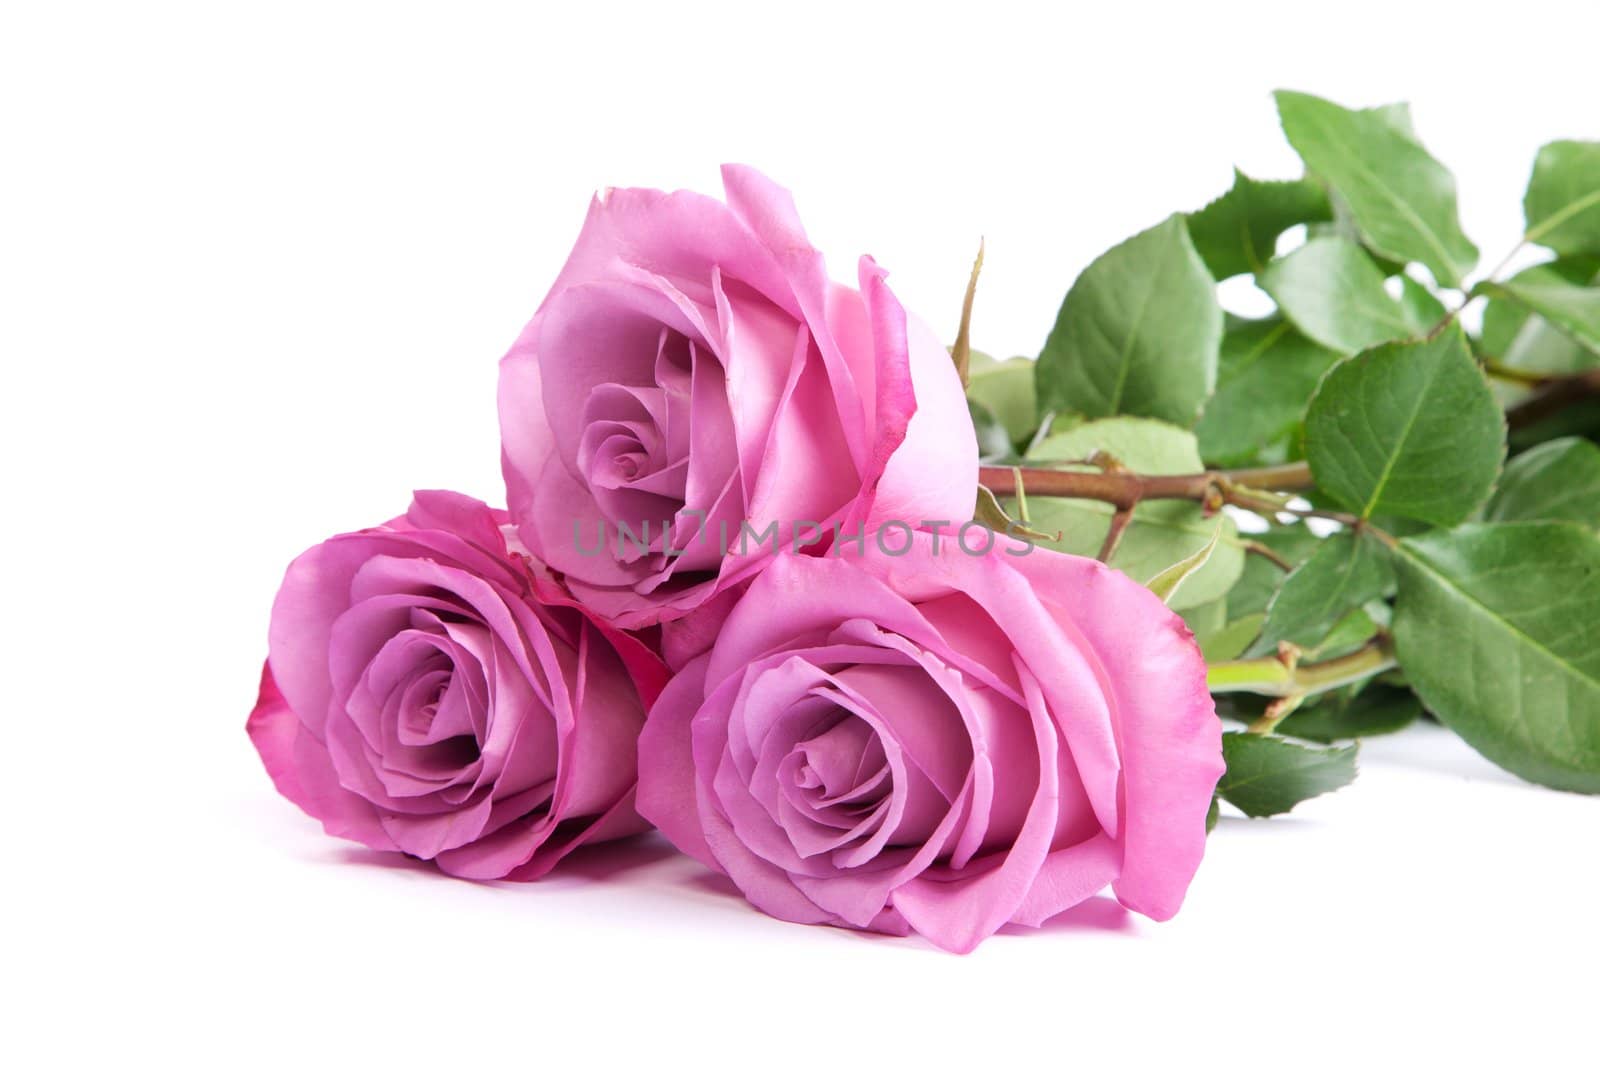 Three fresh pink roses over white background by bloodua